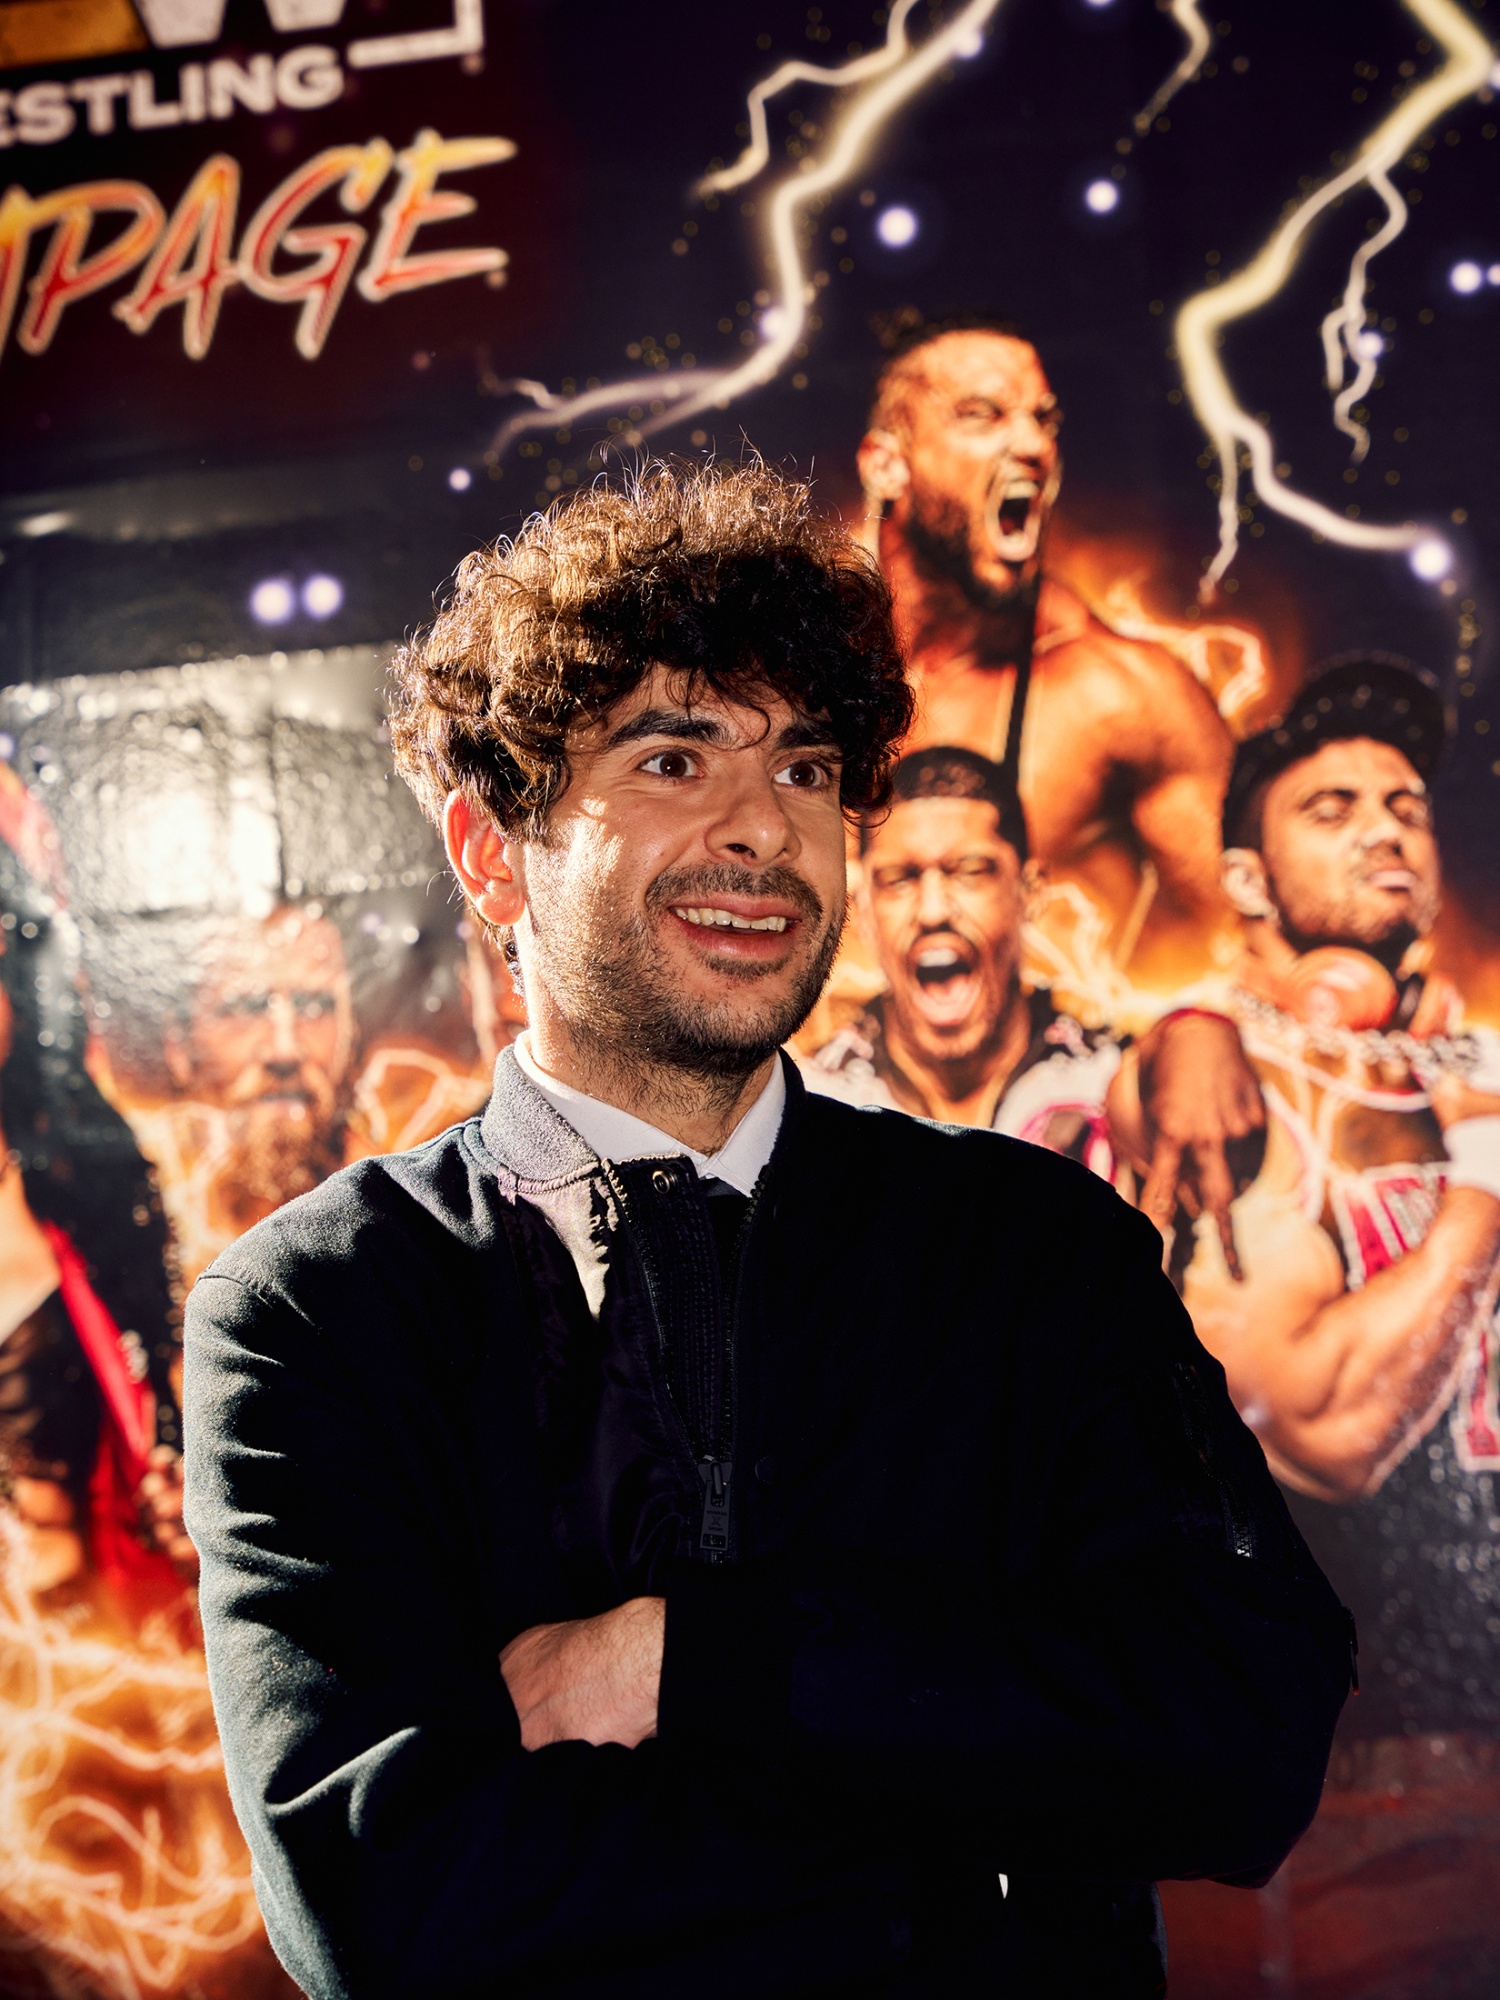 Xxx Sax Video School Wwe - WWE Challenger AEW Fueled by Tony Khan's Wrestling Obsession - Bloomberg